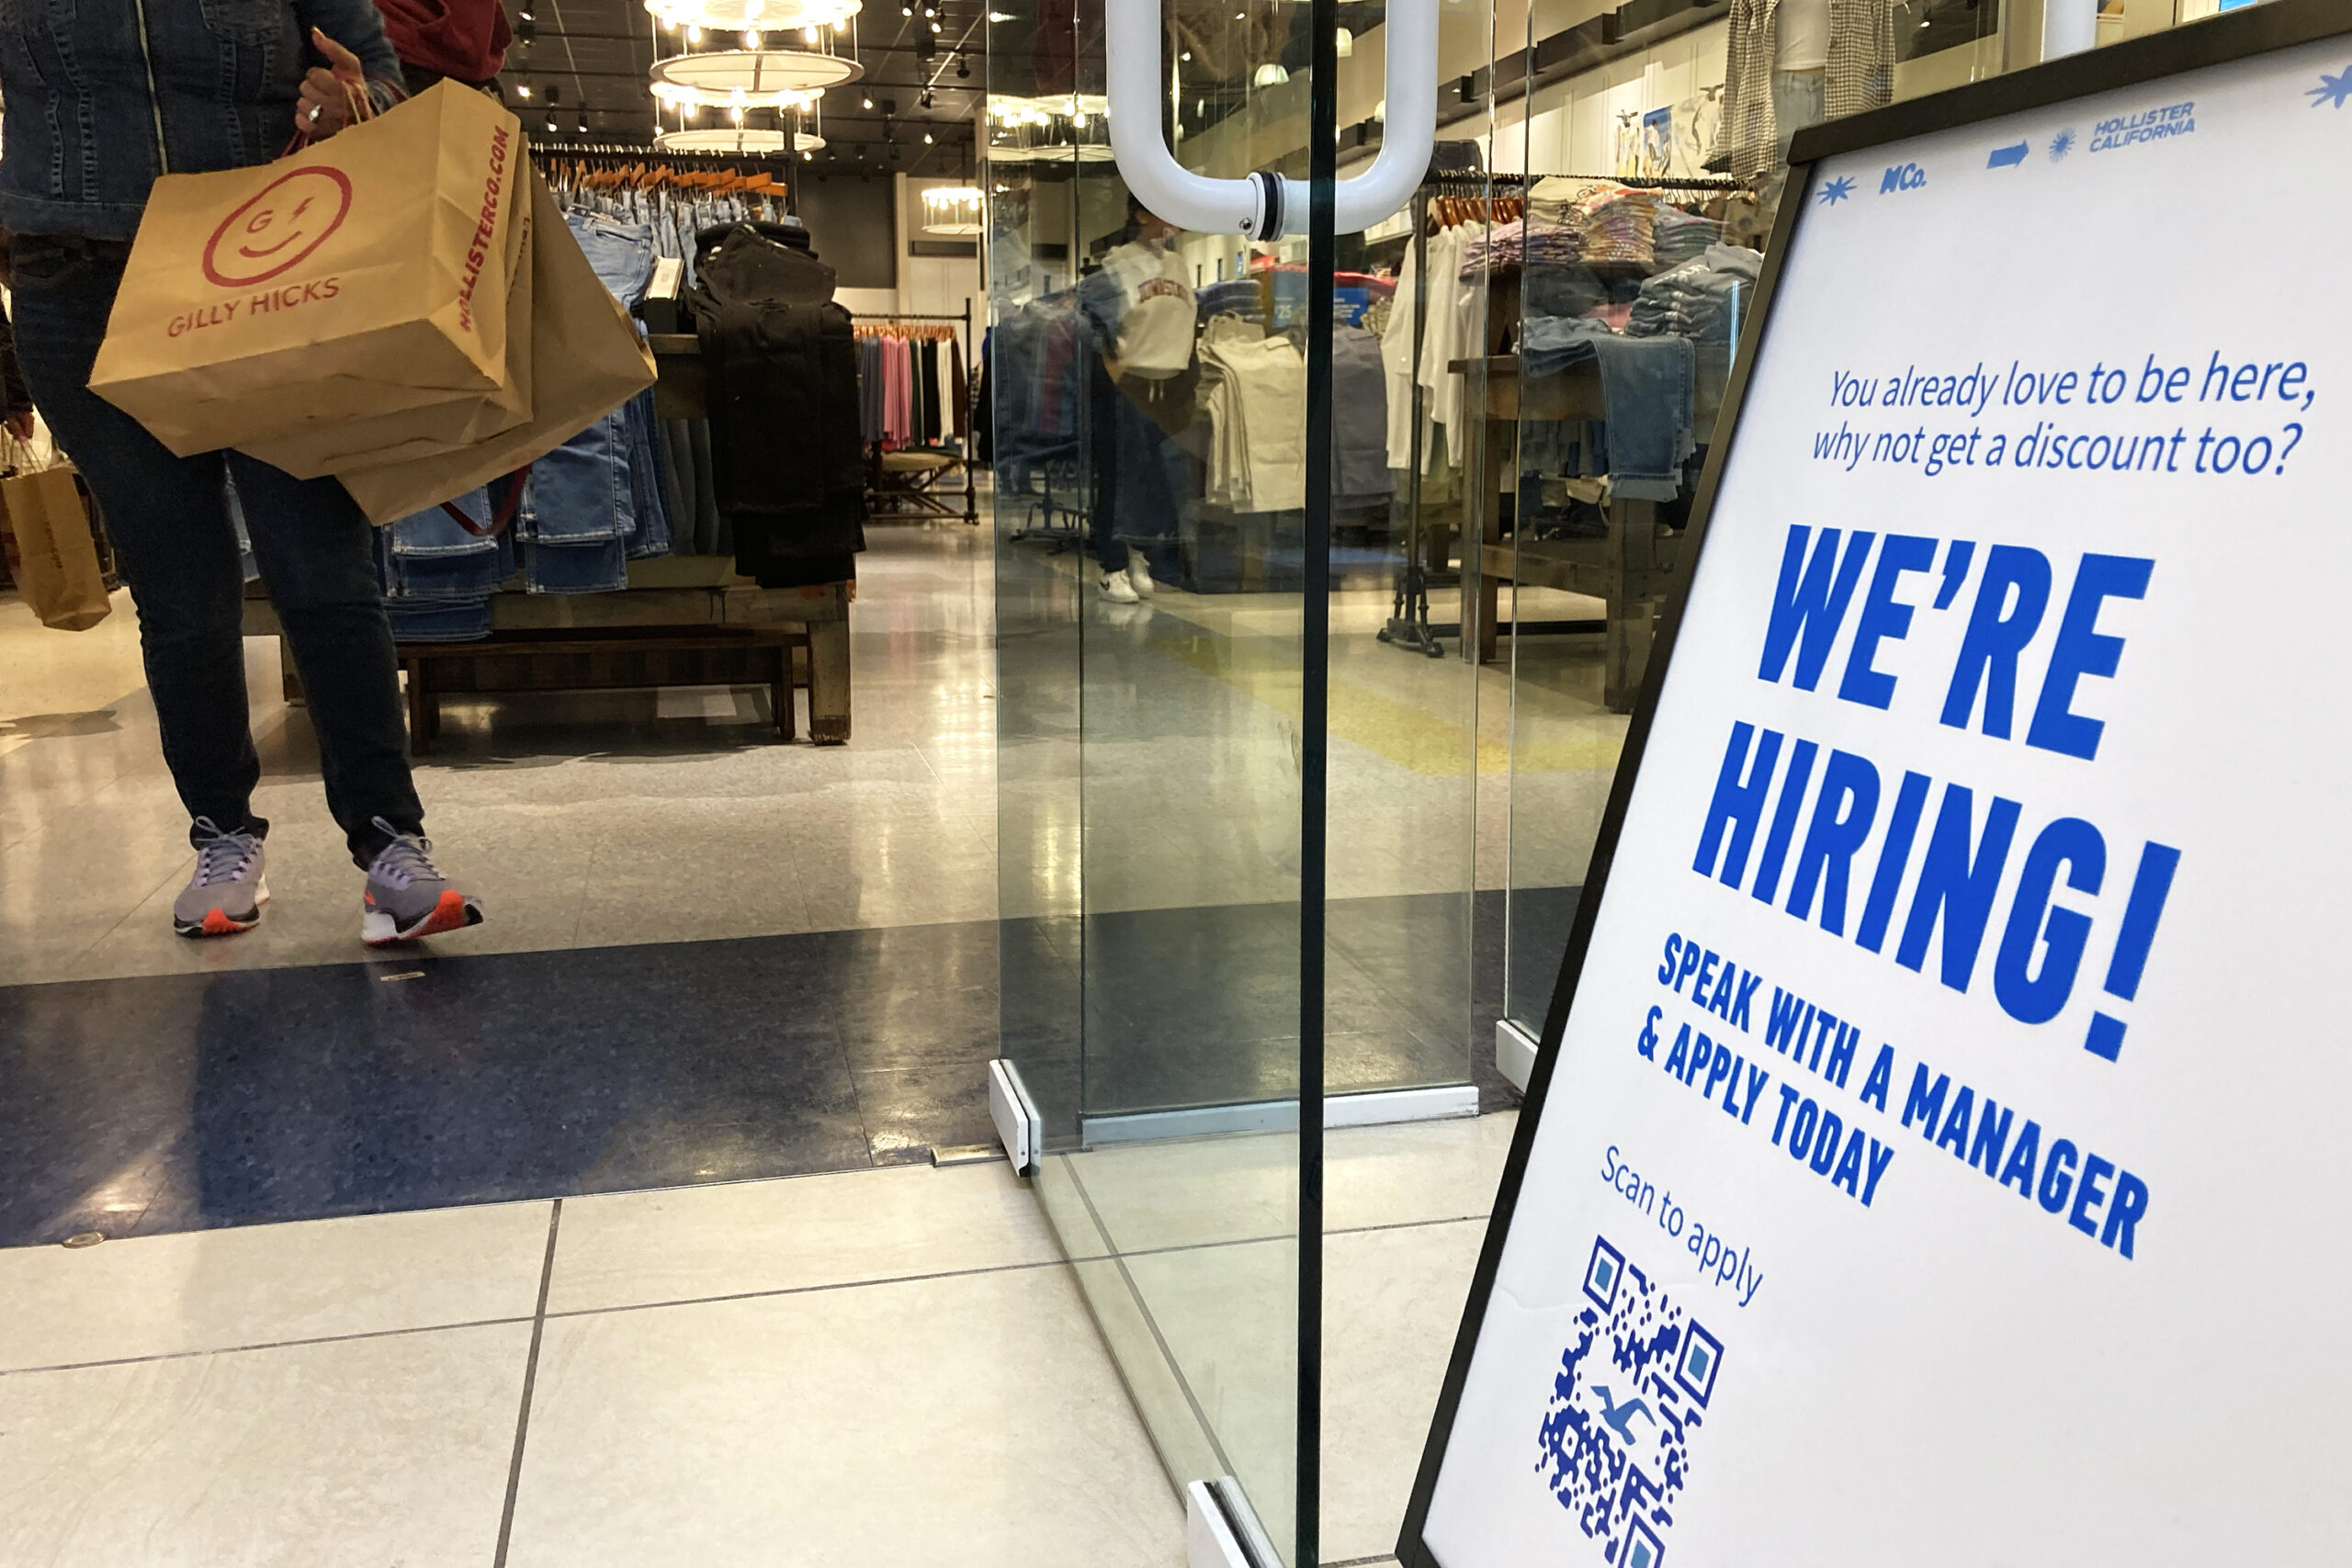 A "we're hiring" sign on display at a retail store.